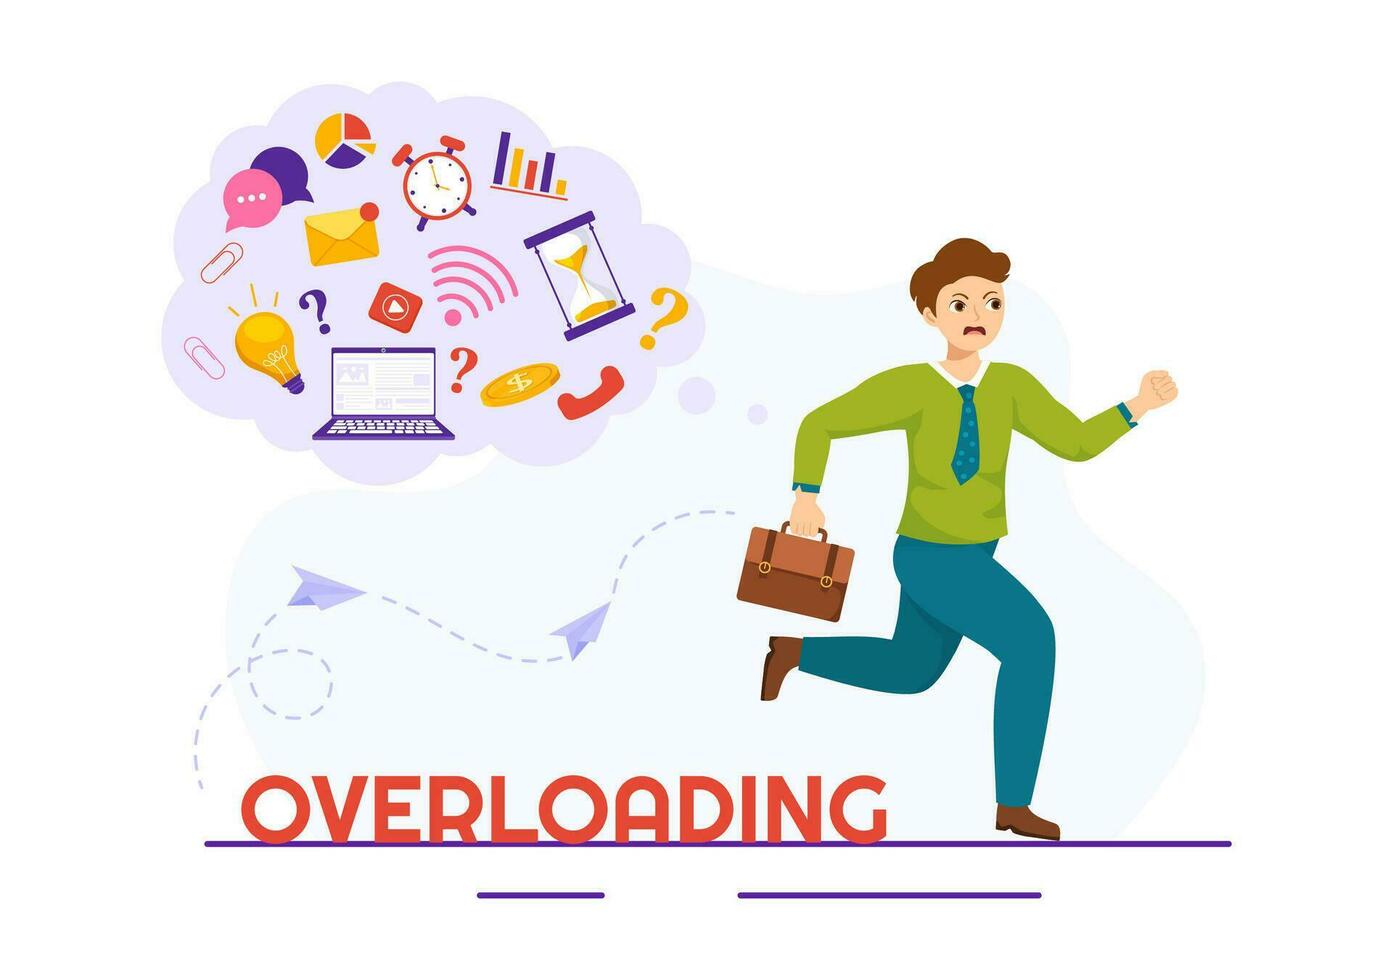 Overloading Vector Illustration with Busy work and Multitasking Employee to Finish Many Documents or Digital Information in Hand Drawn Templates